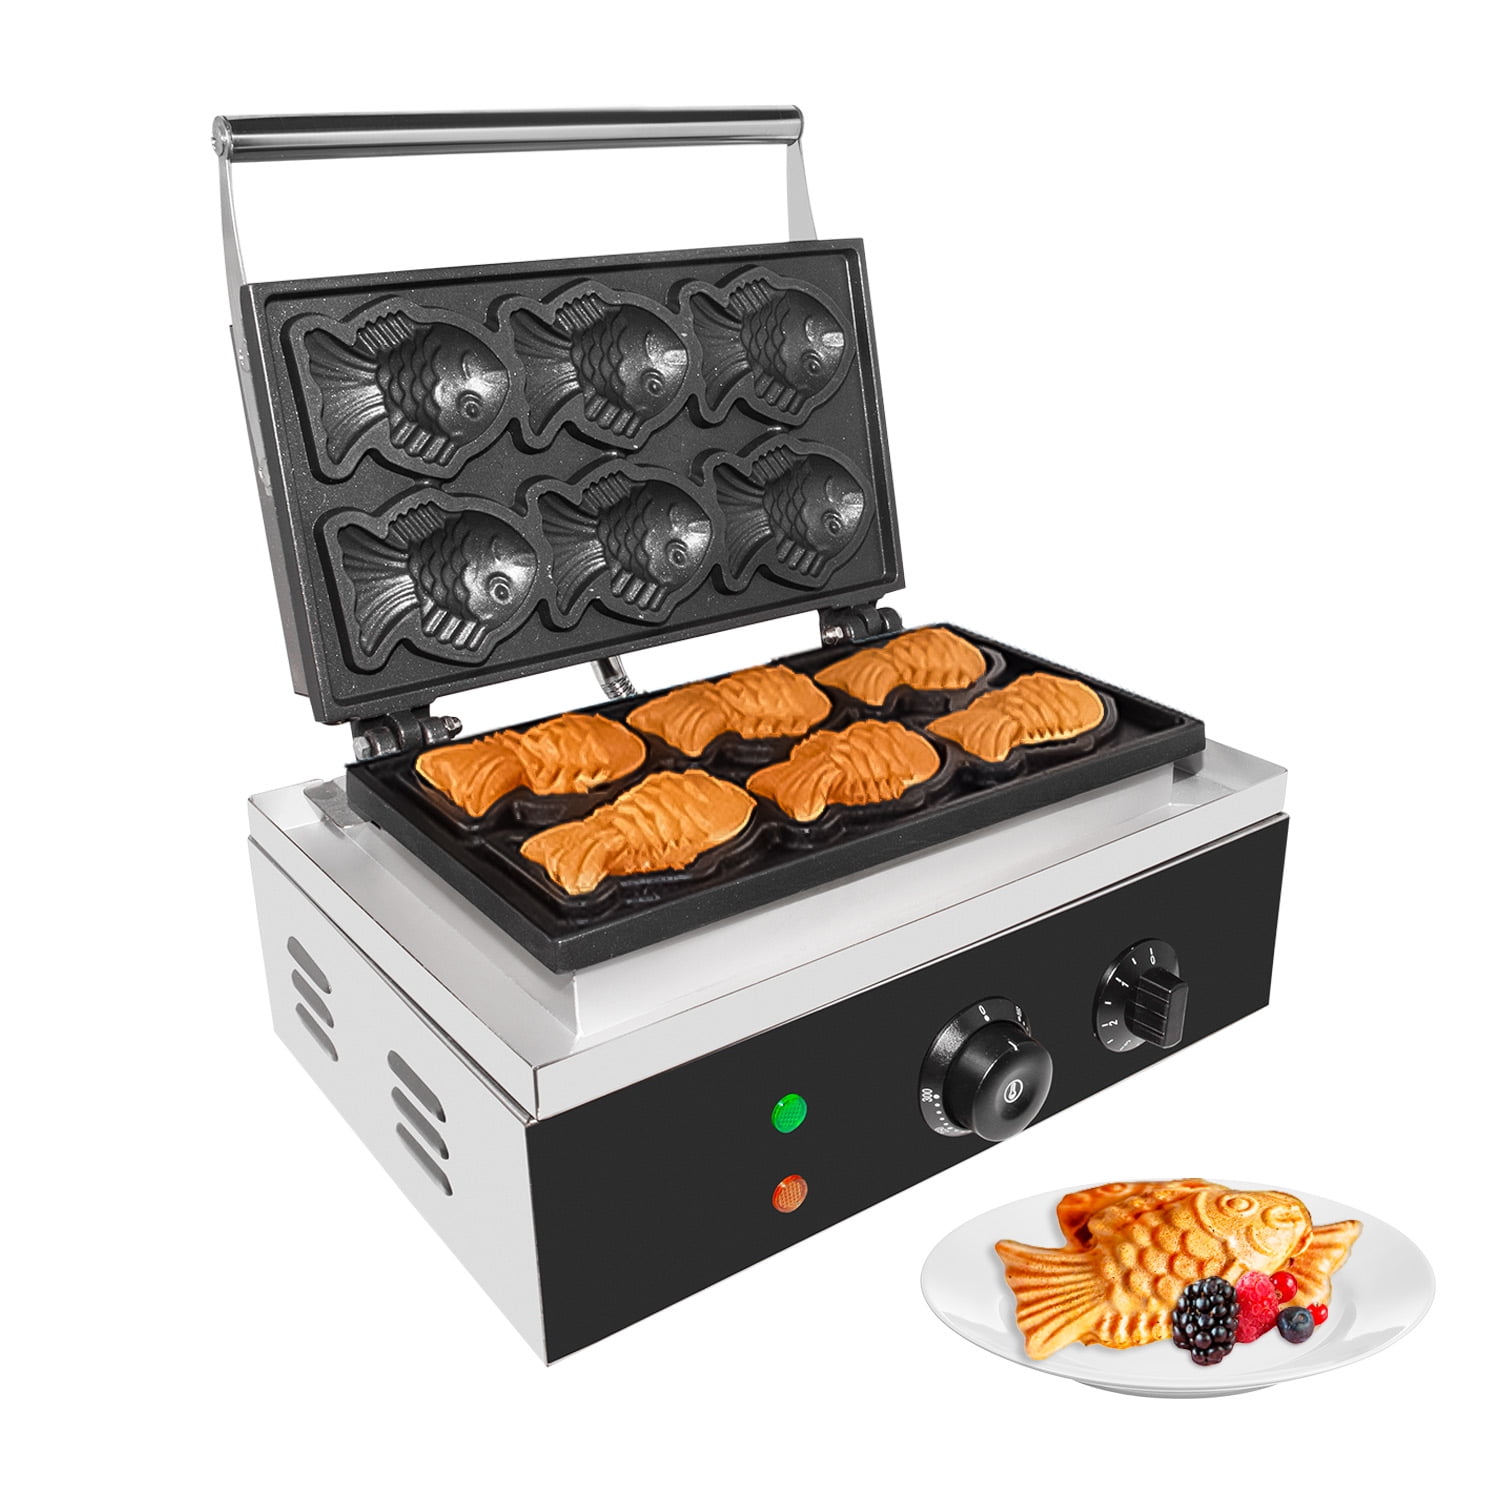 Electric Hotdog Waffle Maker Muffin Sausage Nonstick Coating Molder Cooking Tool 